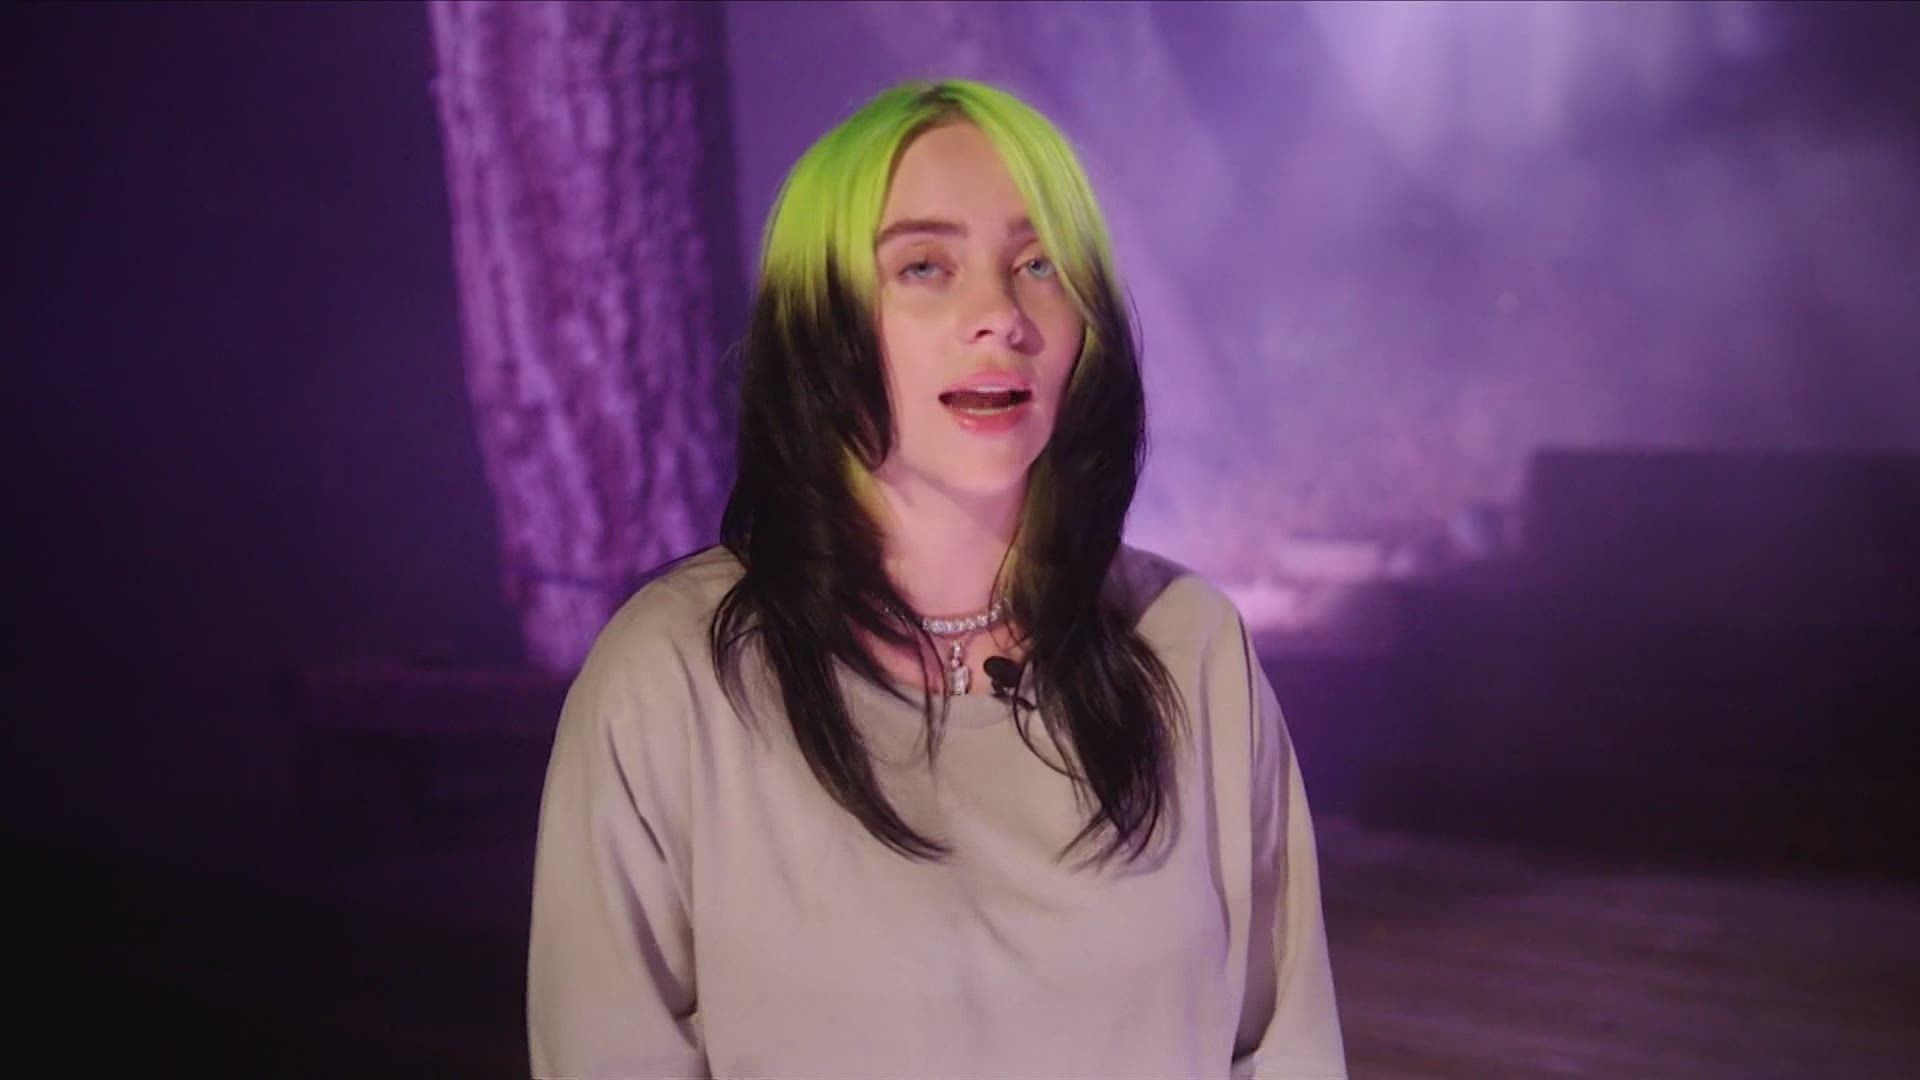 Billie Eilish performs 'My Future' for first time at DNC